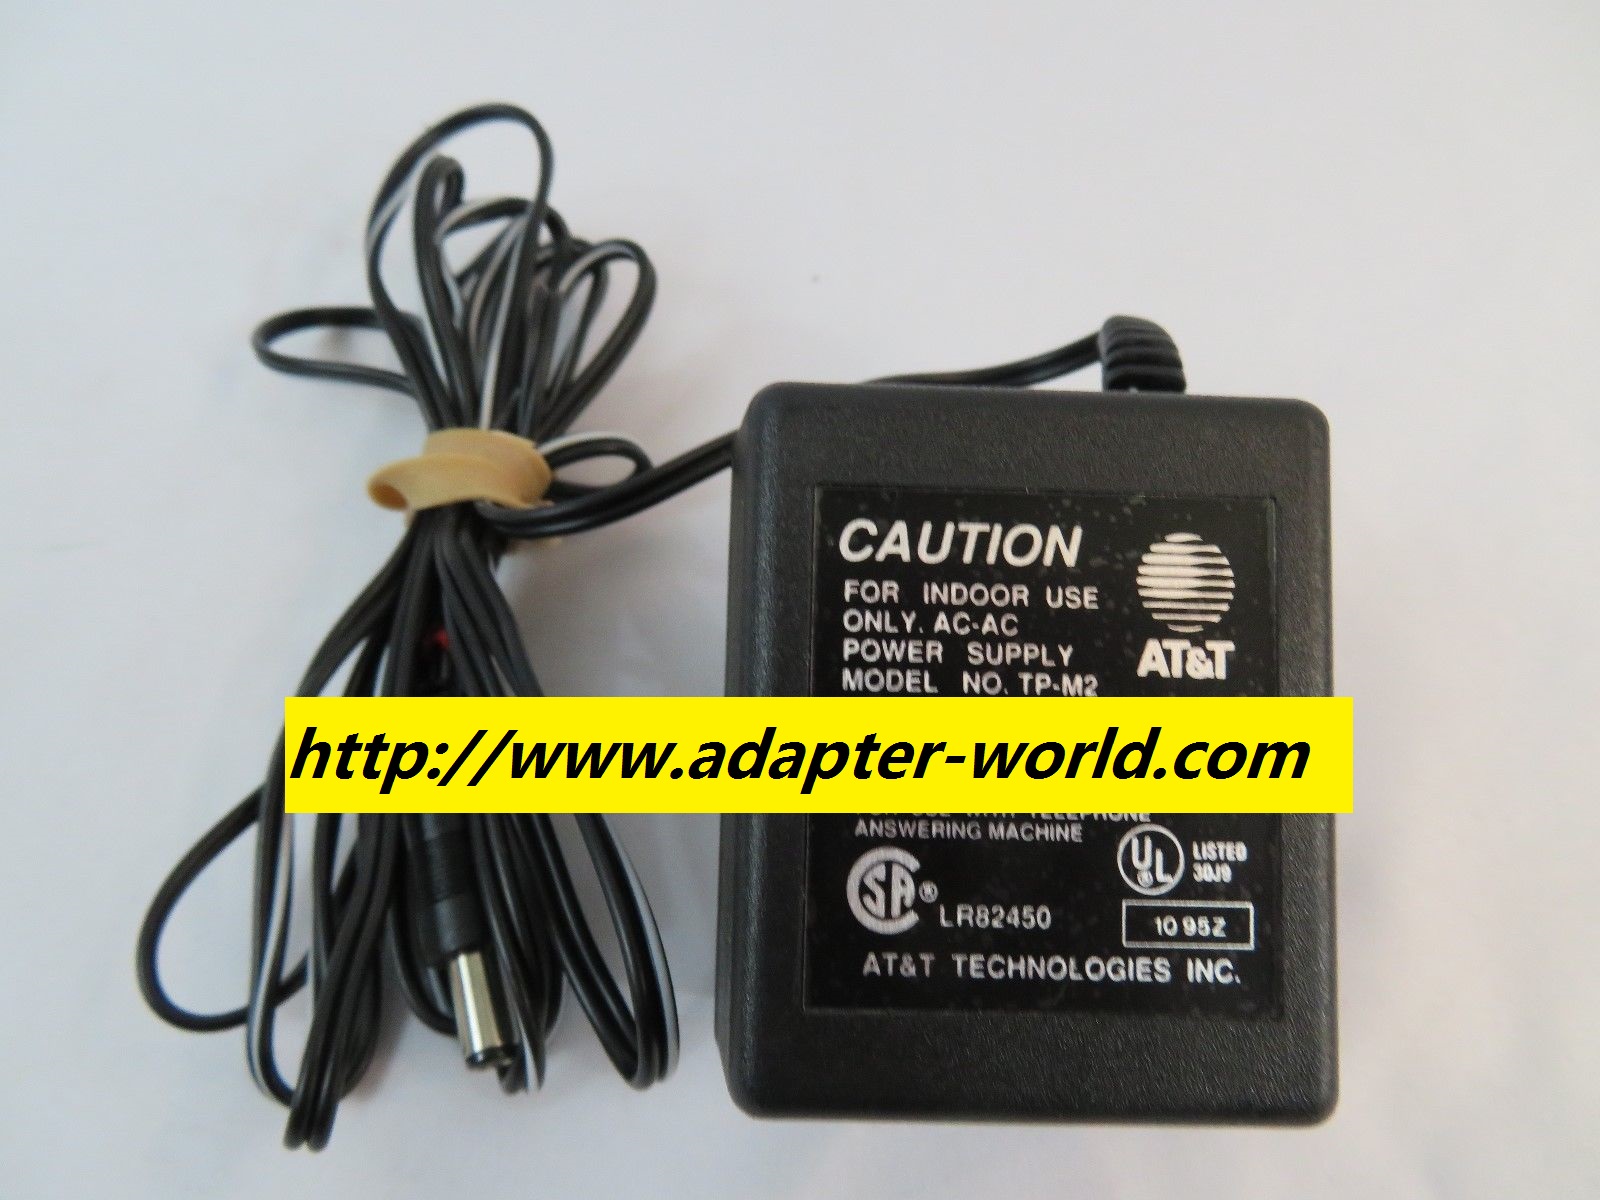 *100% Brand NEW* AT&T TP-M2 Phone Base Power Supply Adapter AC Charger Free Shipping!